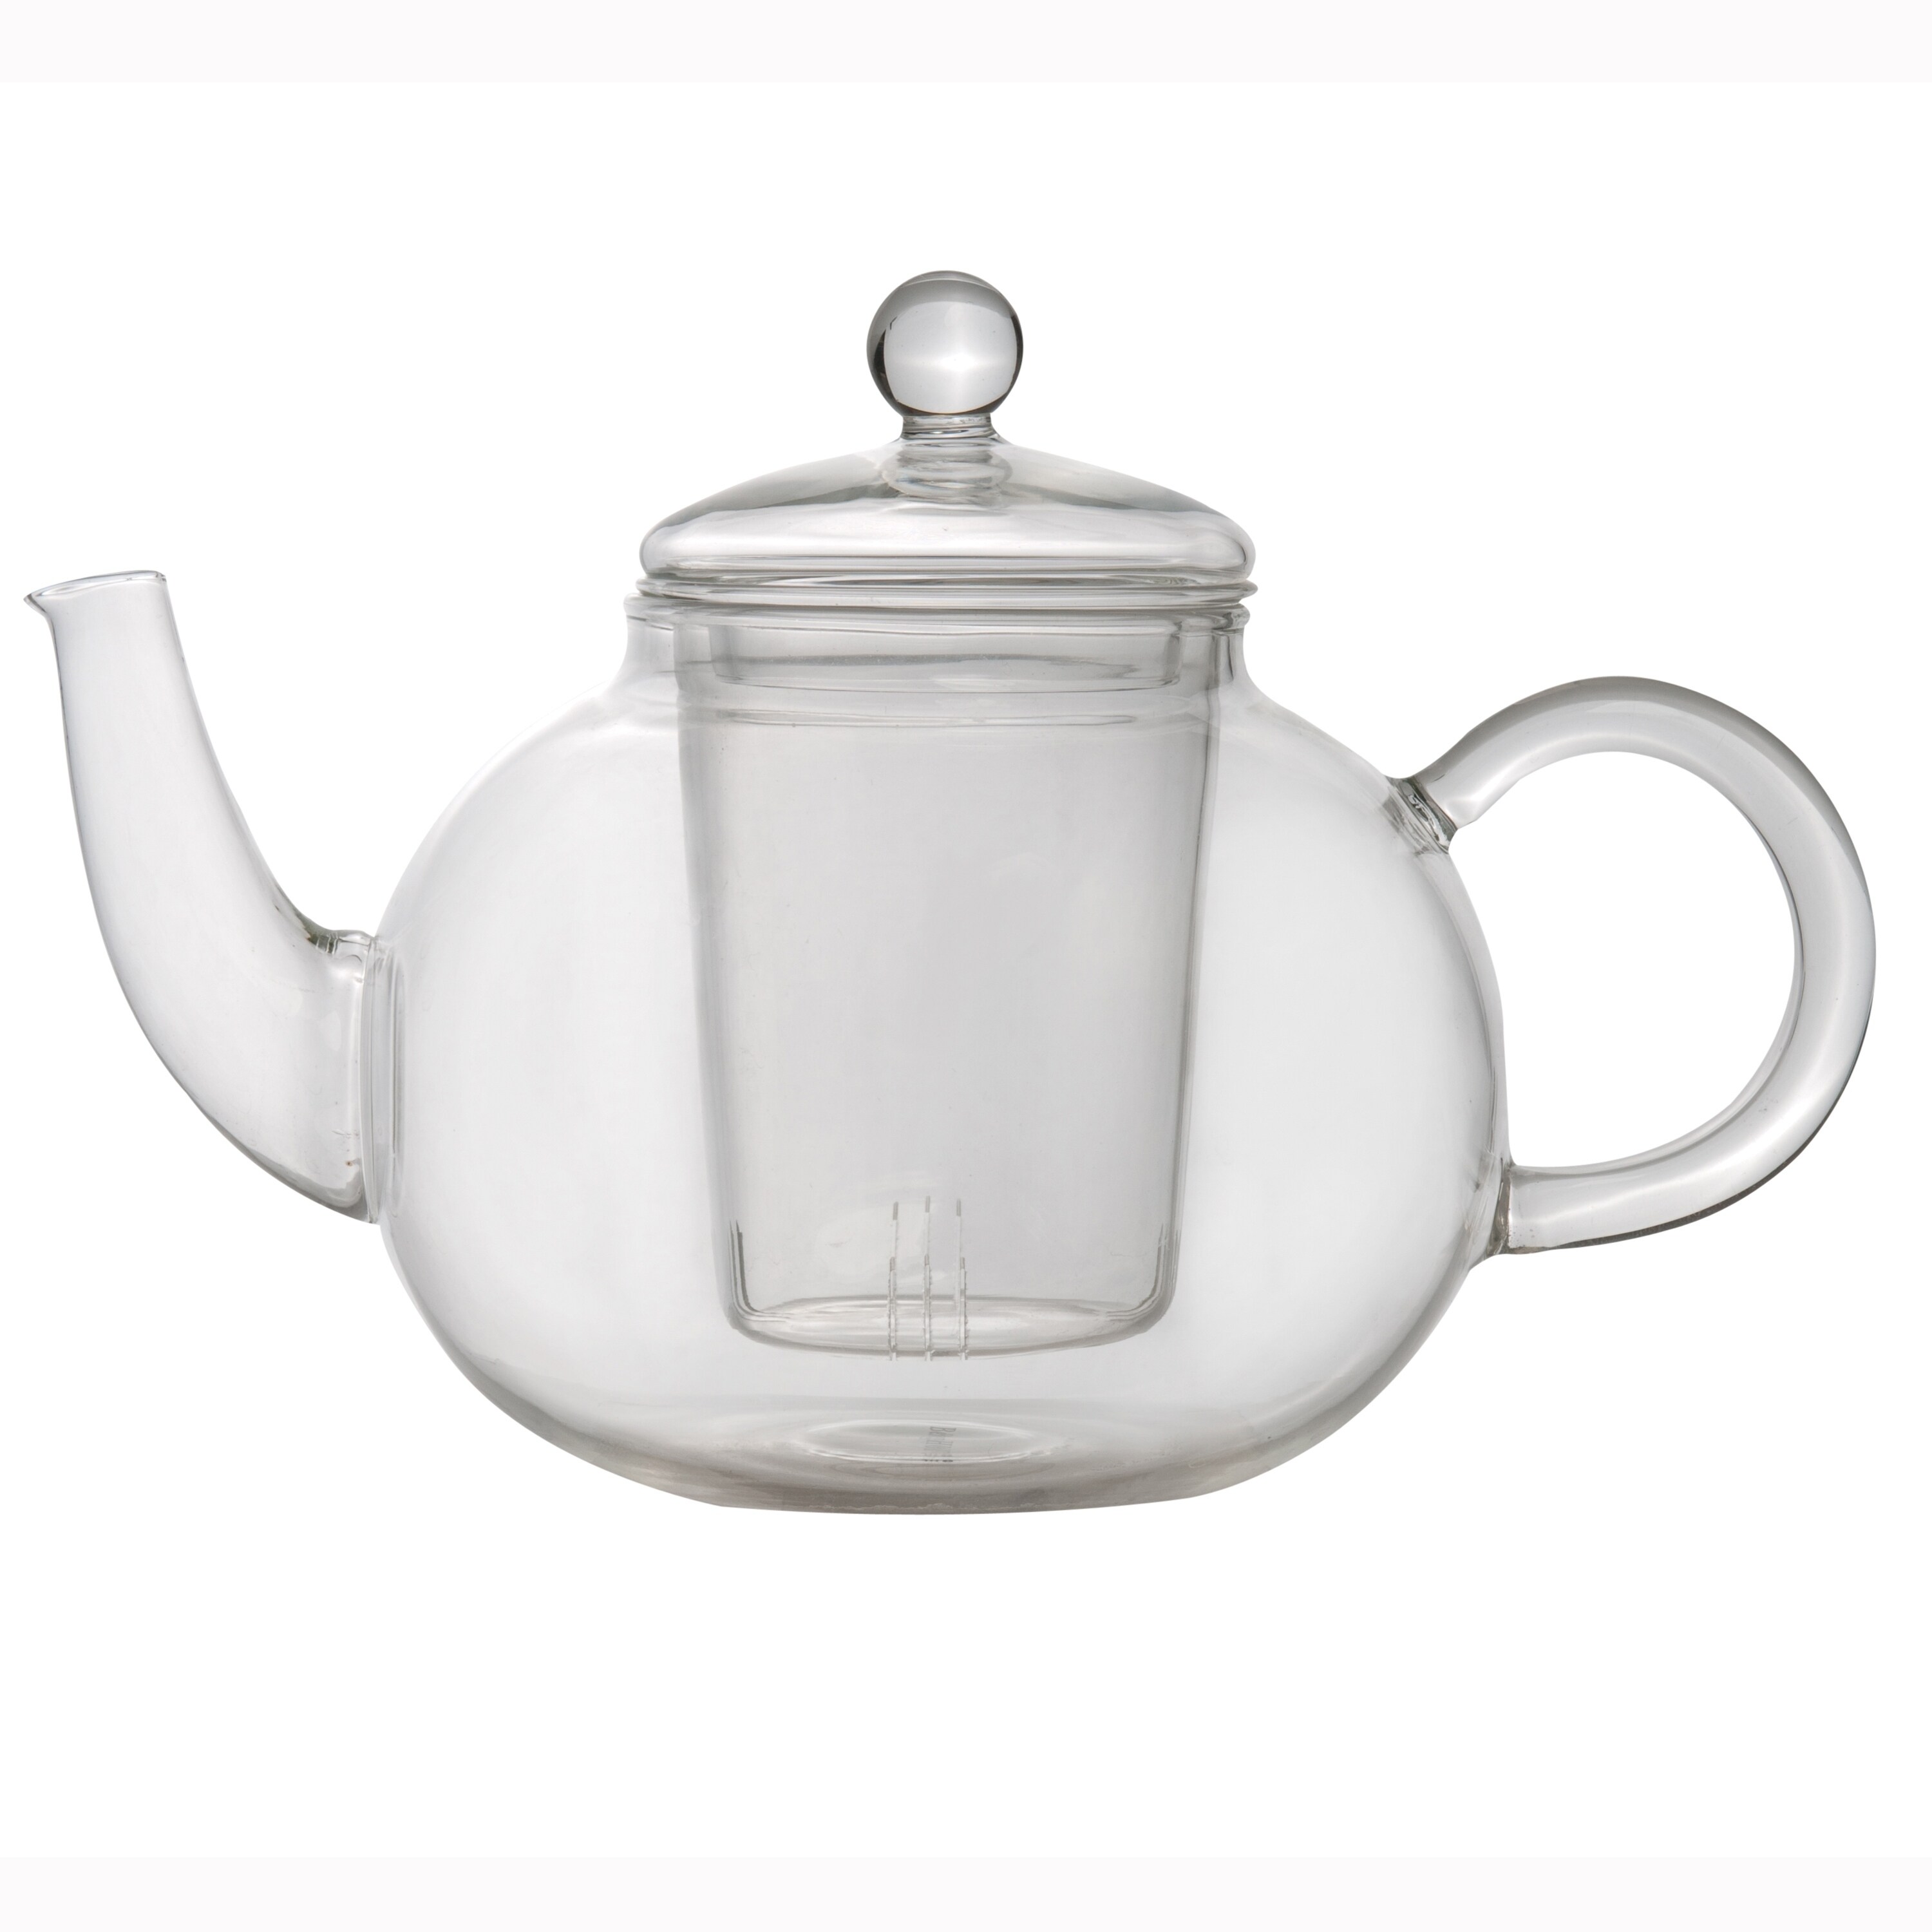 25oz Tempered Glass Tea Pot Infuser with Stainless Steel Basket